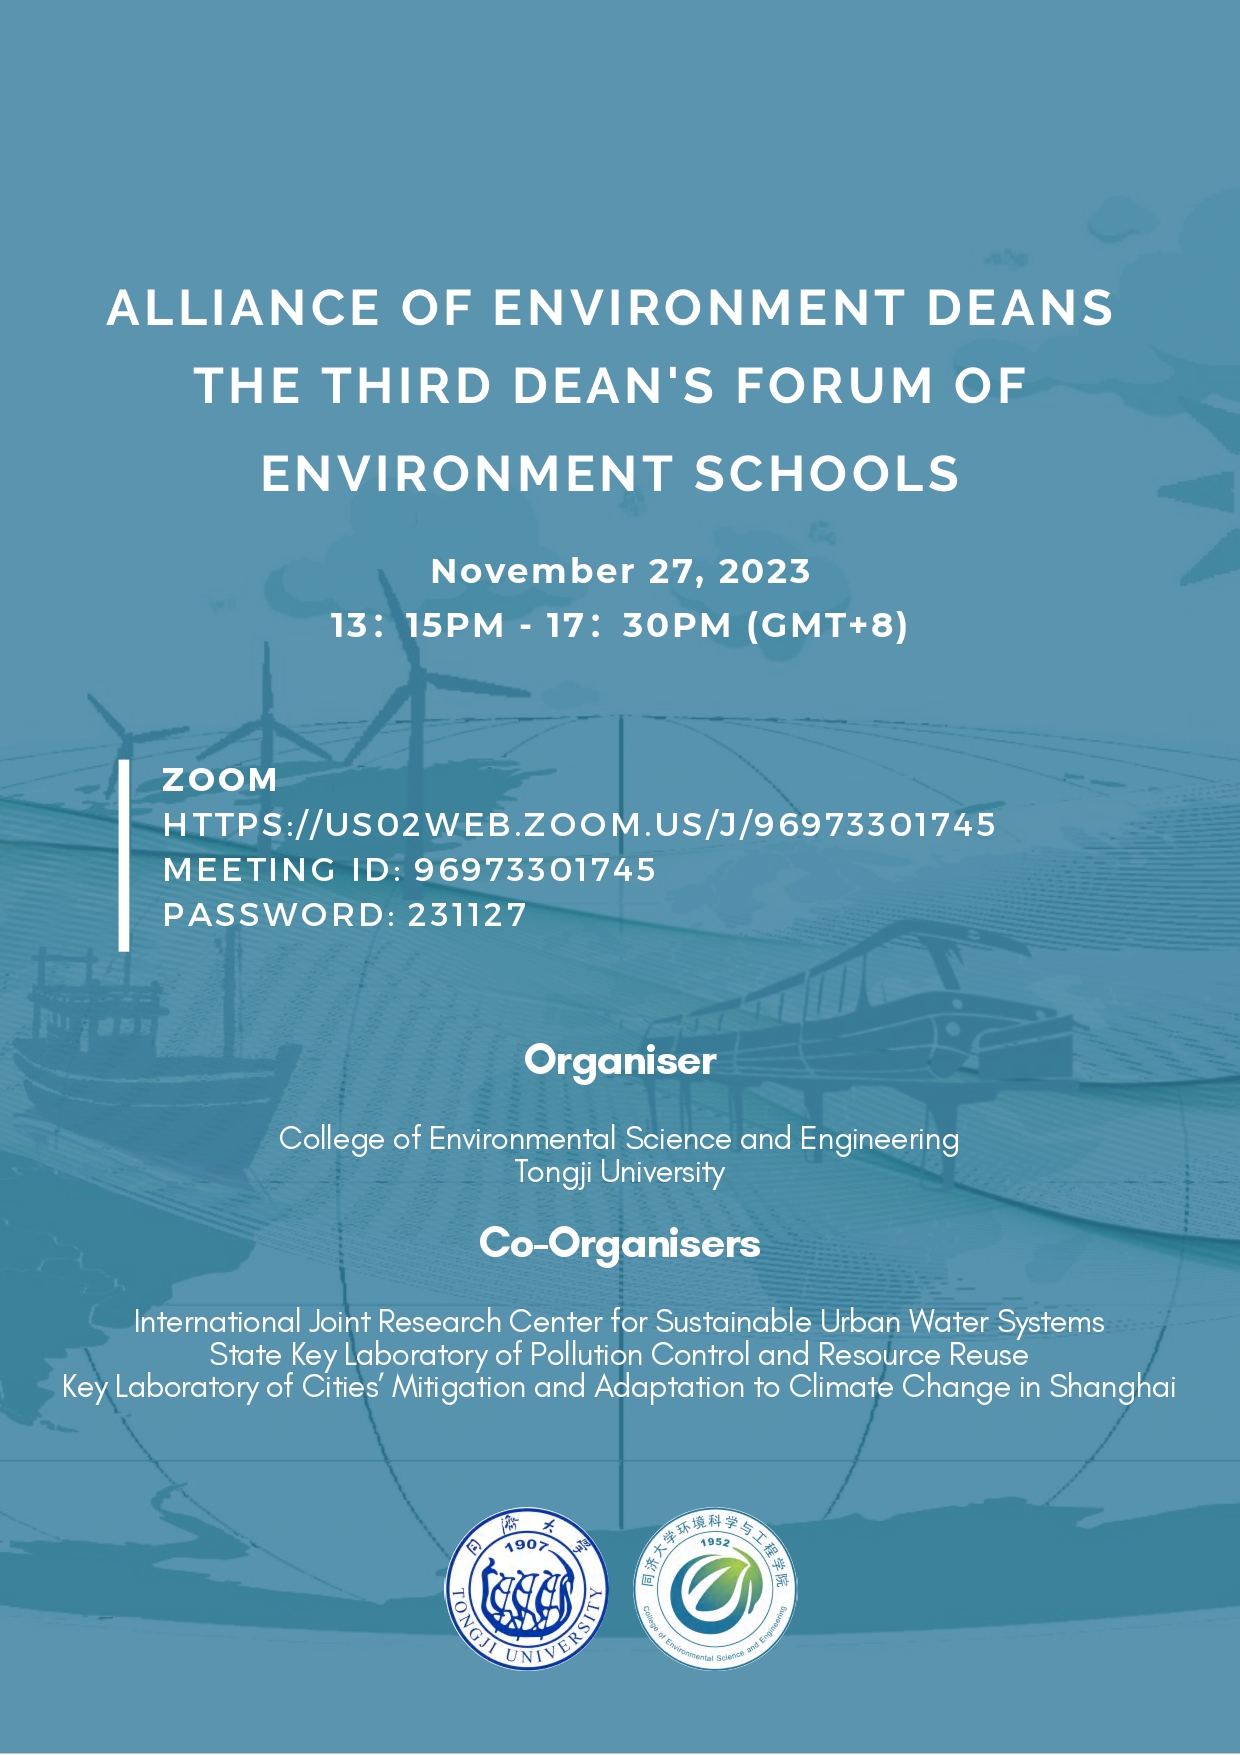 ALLIANCE OF DEANS OF ENVIRONMENTAL SCHOOLS